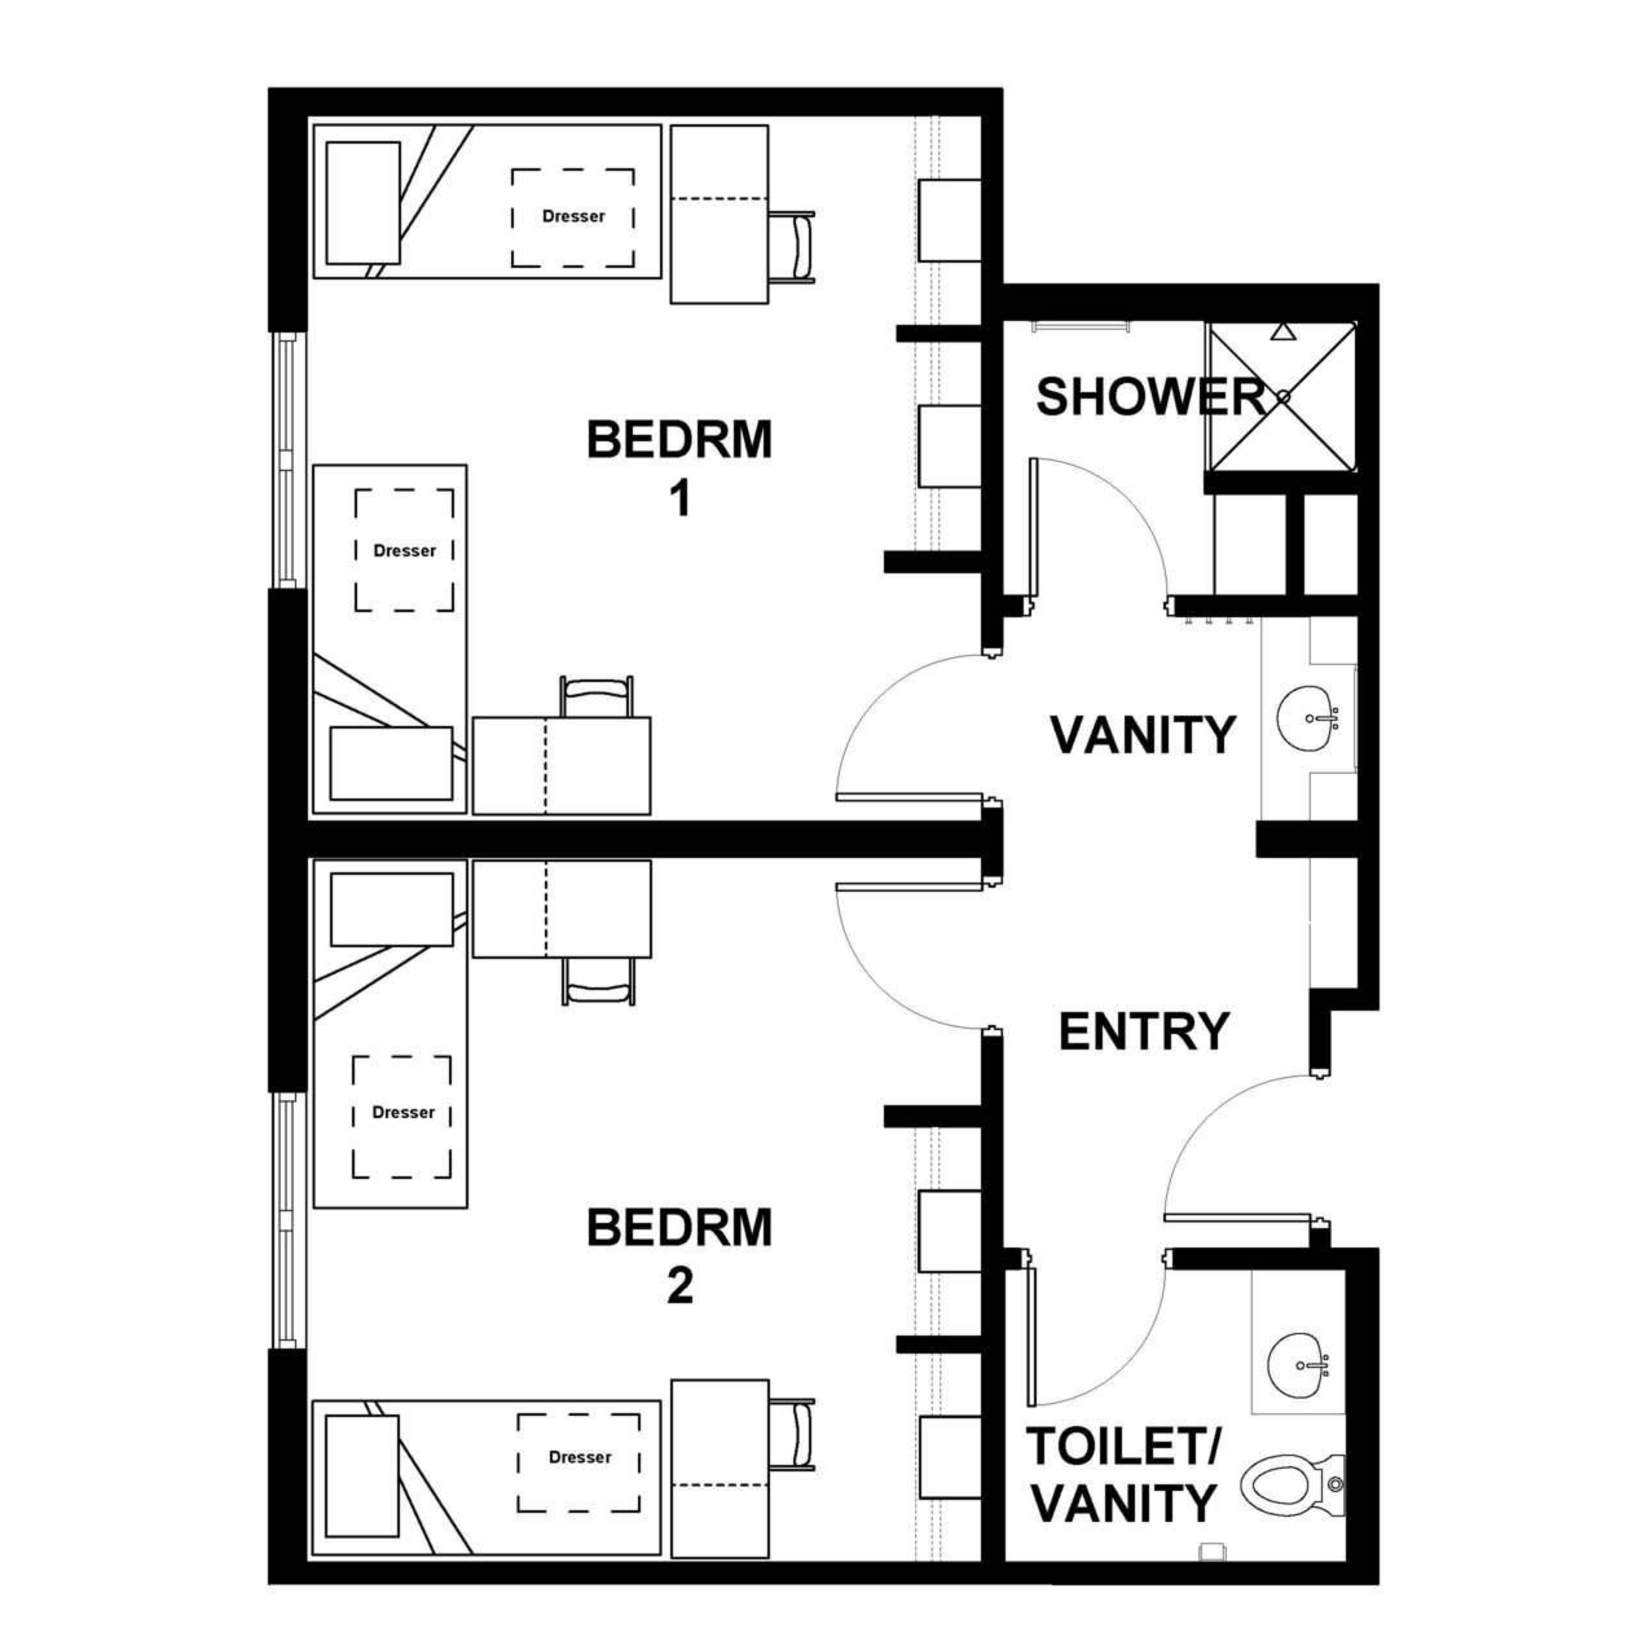 Falls Hall suite layout